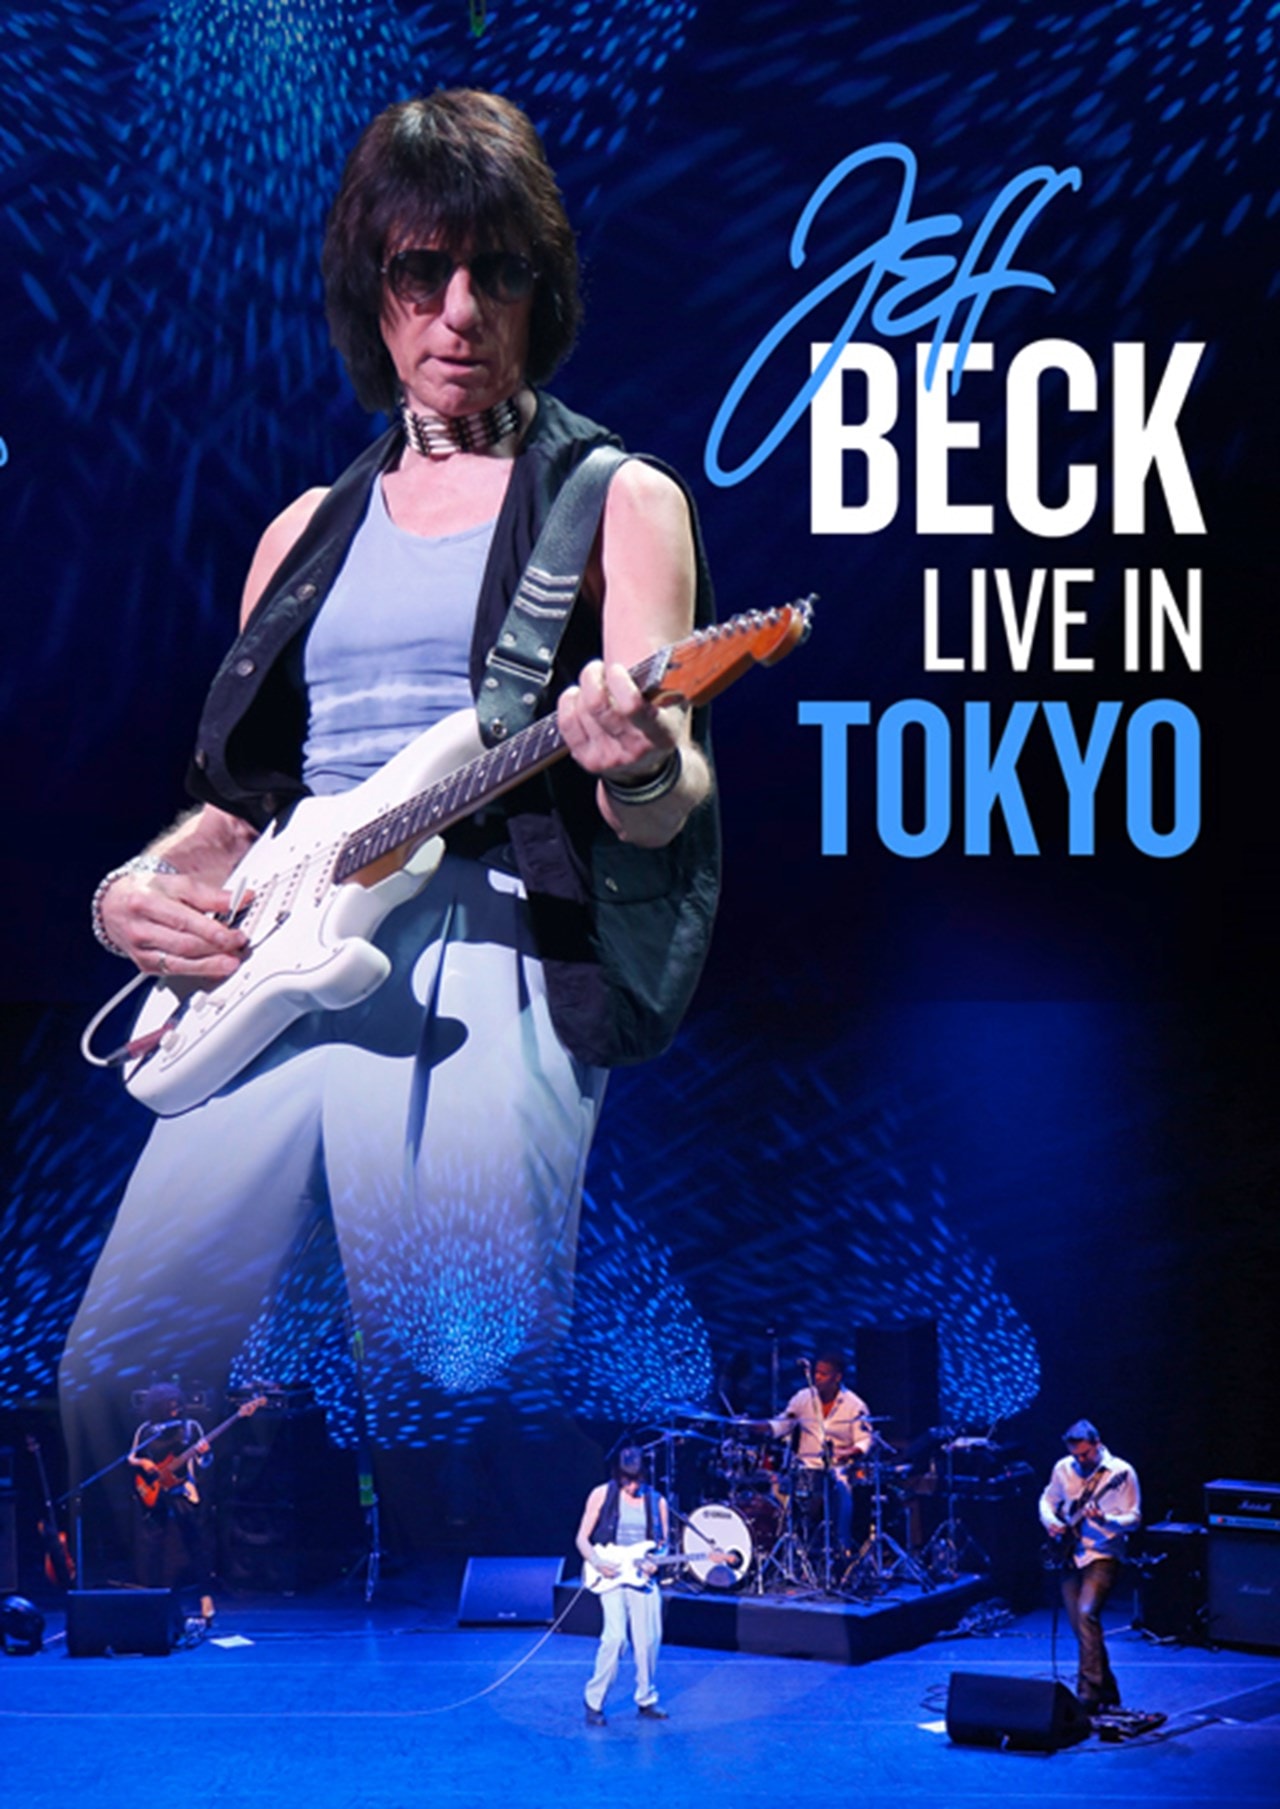 Jeff Beck Live in Tokyo DVD Free shipping over £20 HMV Store